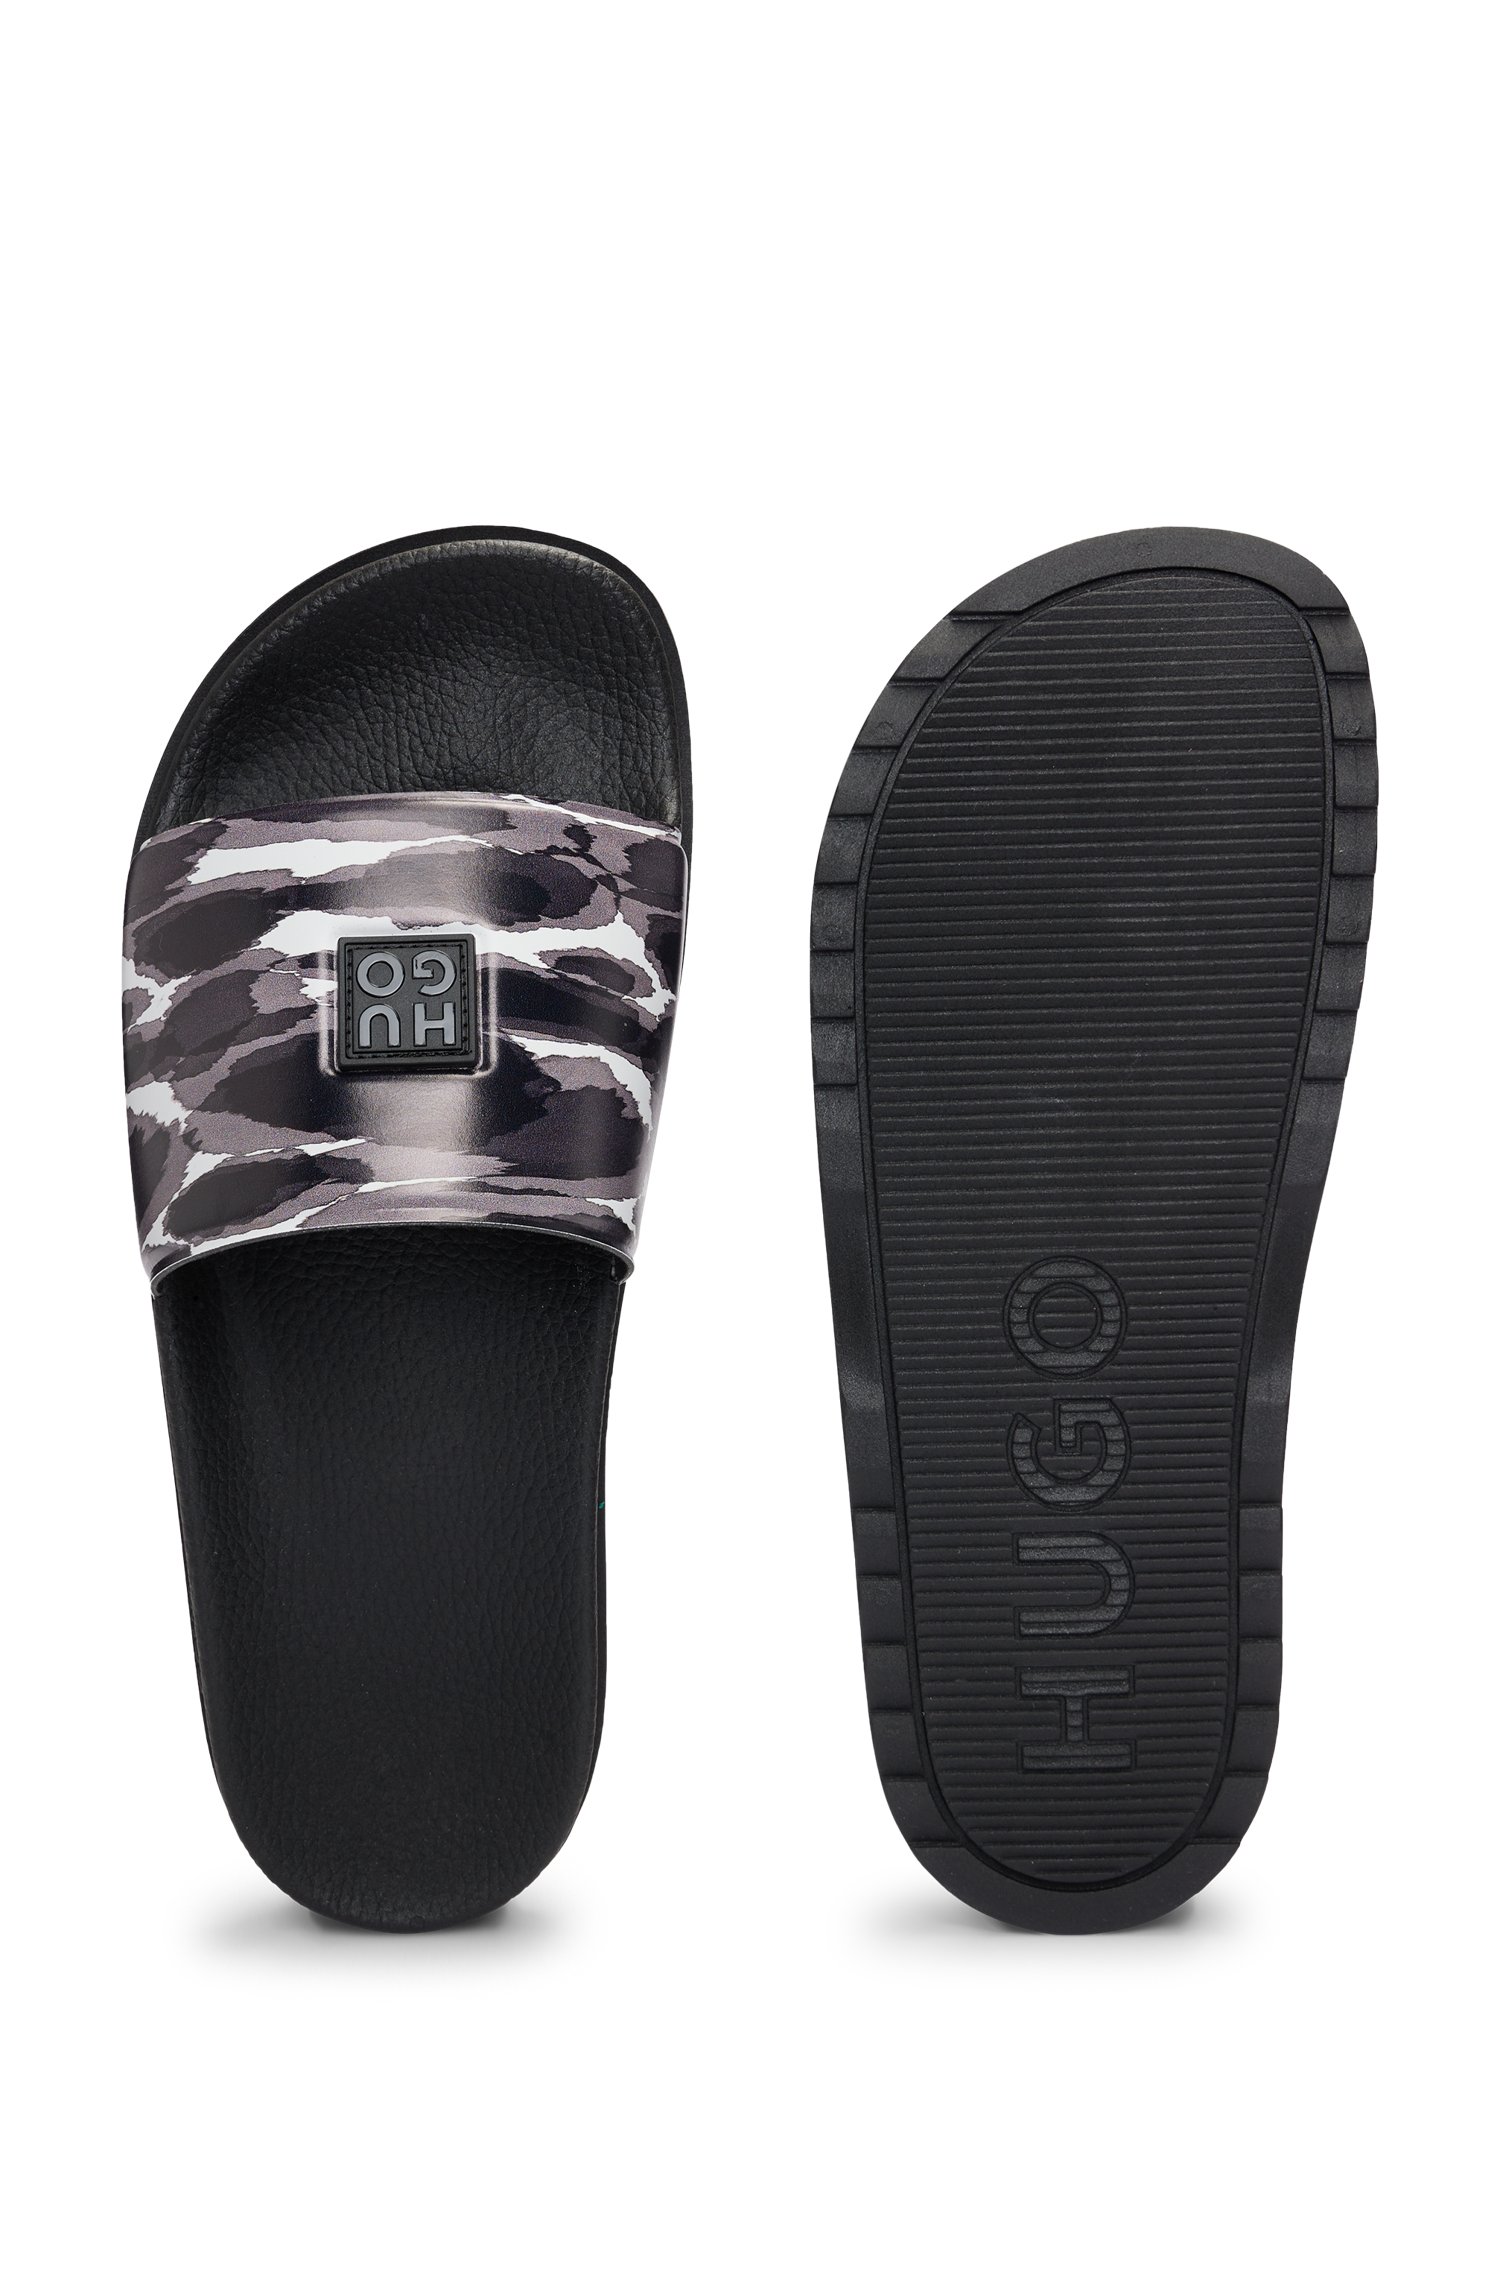 Printed slides with stacked logo on upper